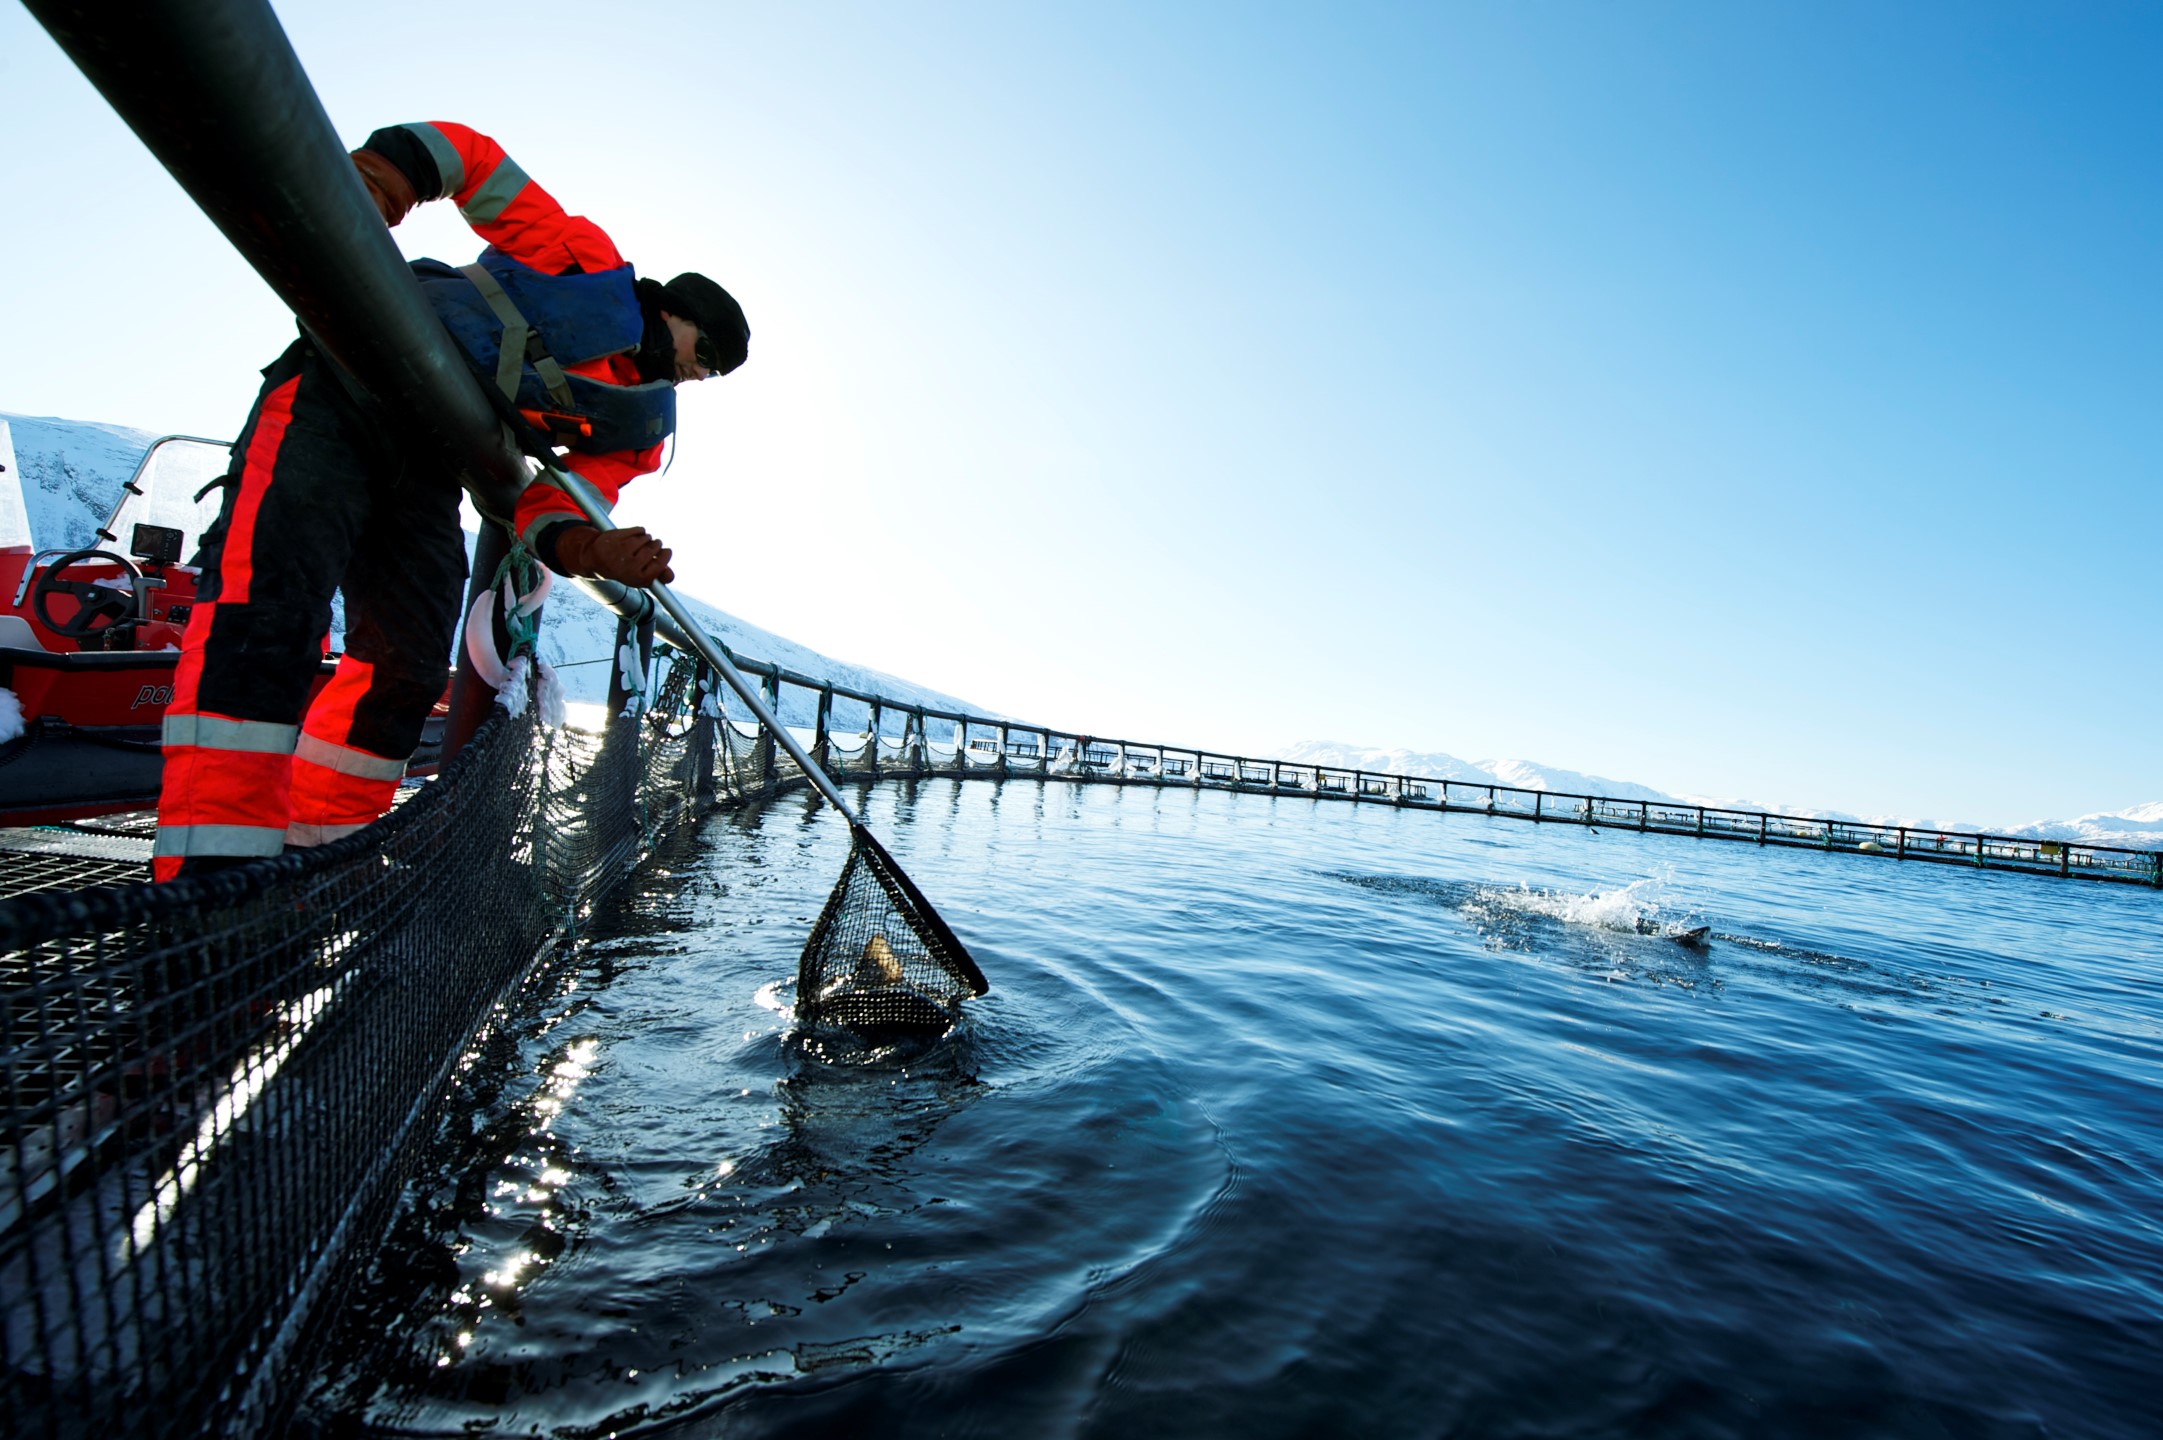 Salmon farming is more environmentally friendly than other types of food production, said the Norwegian Seafood Council